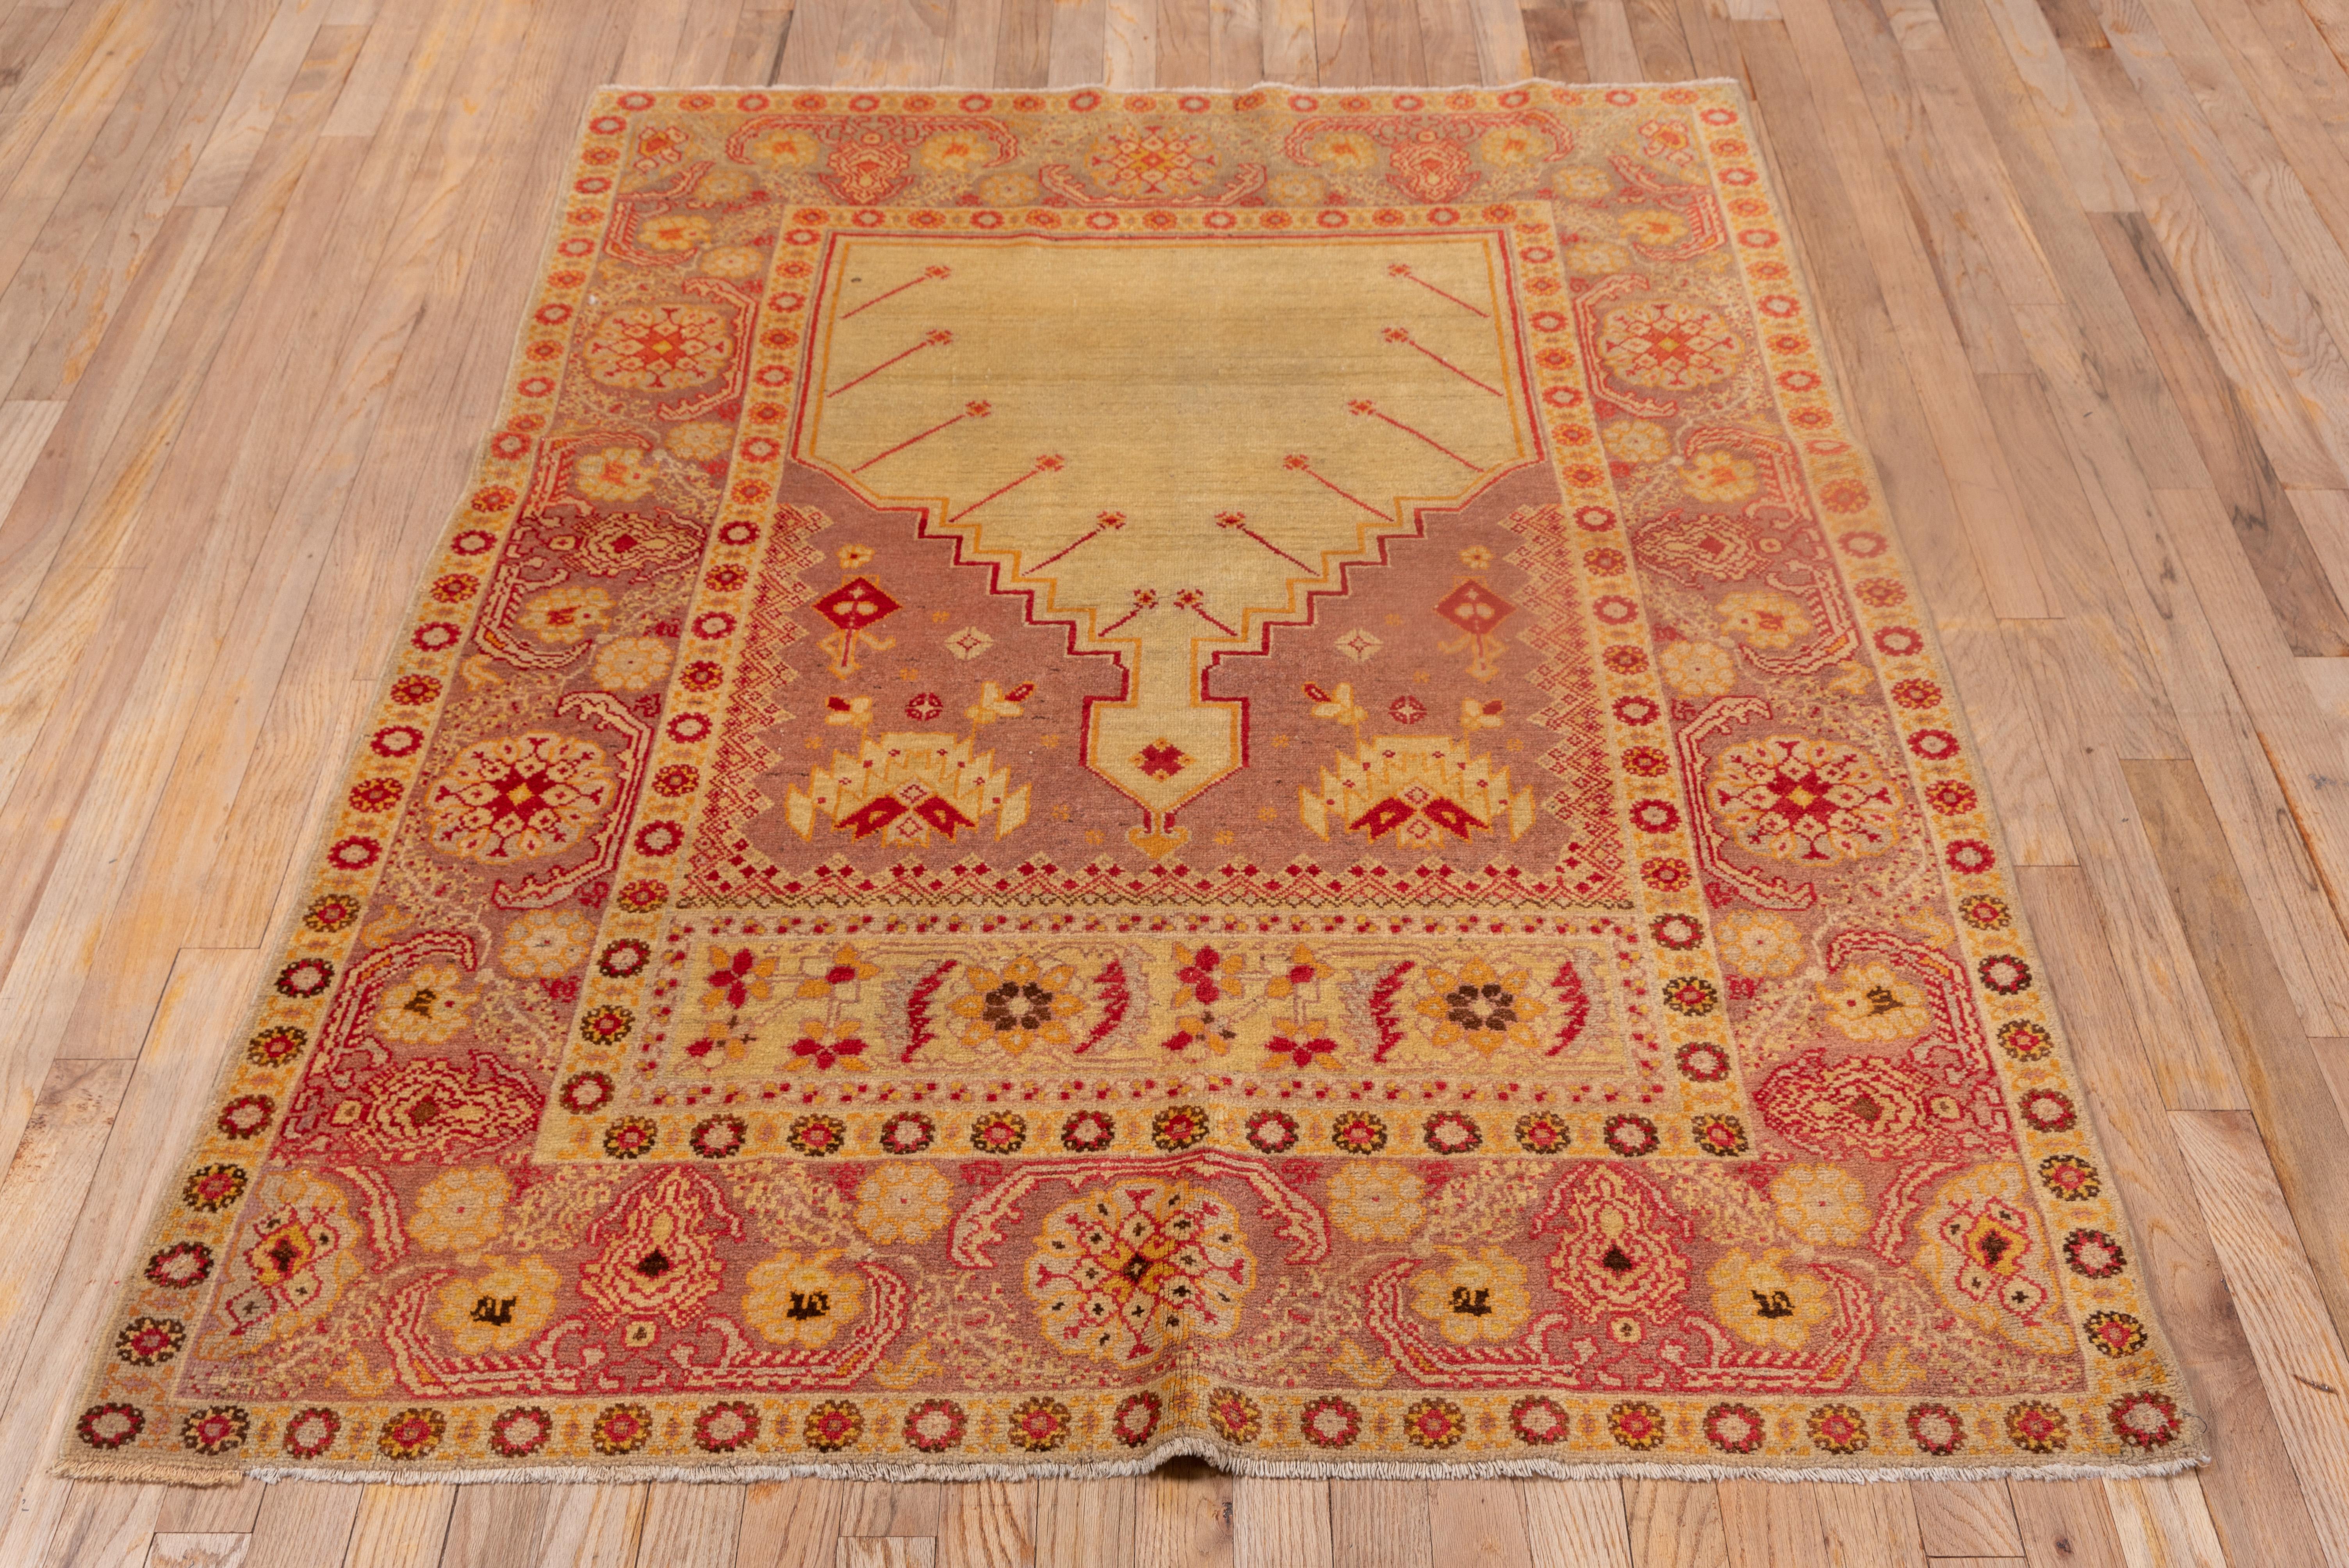 Hand-Knotted Colorful Antique Turkish Hereke Prayer Rug, Yellow and Light Purple Field